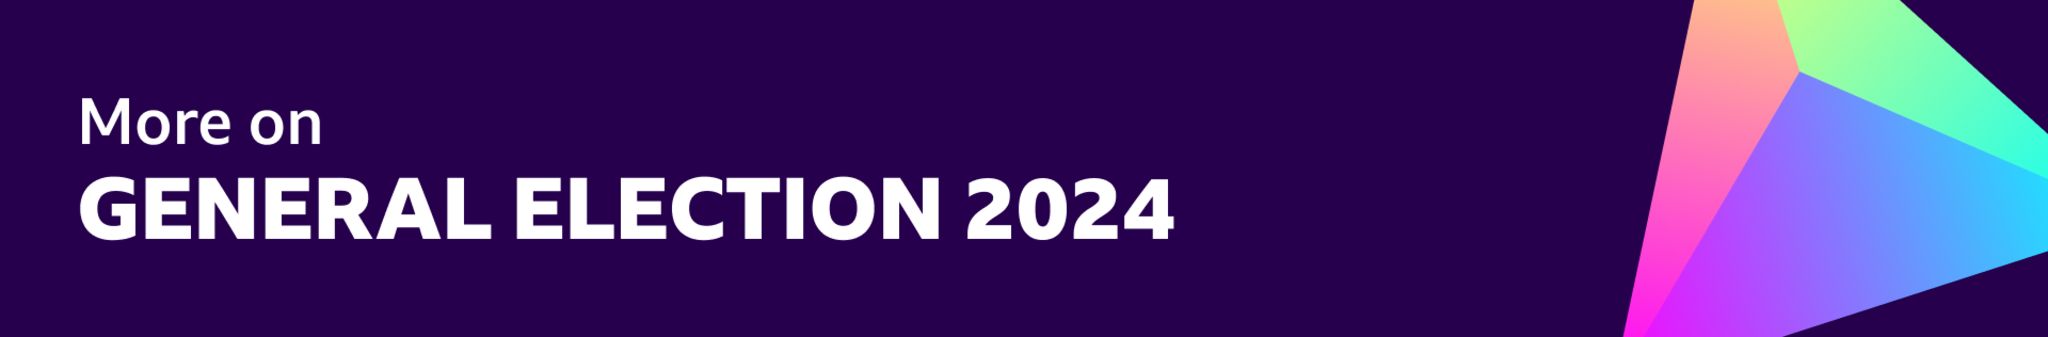 Blue banner saying "more on general election 2024"